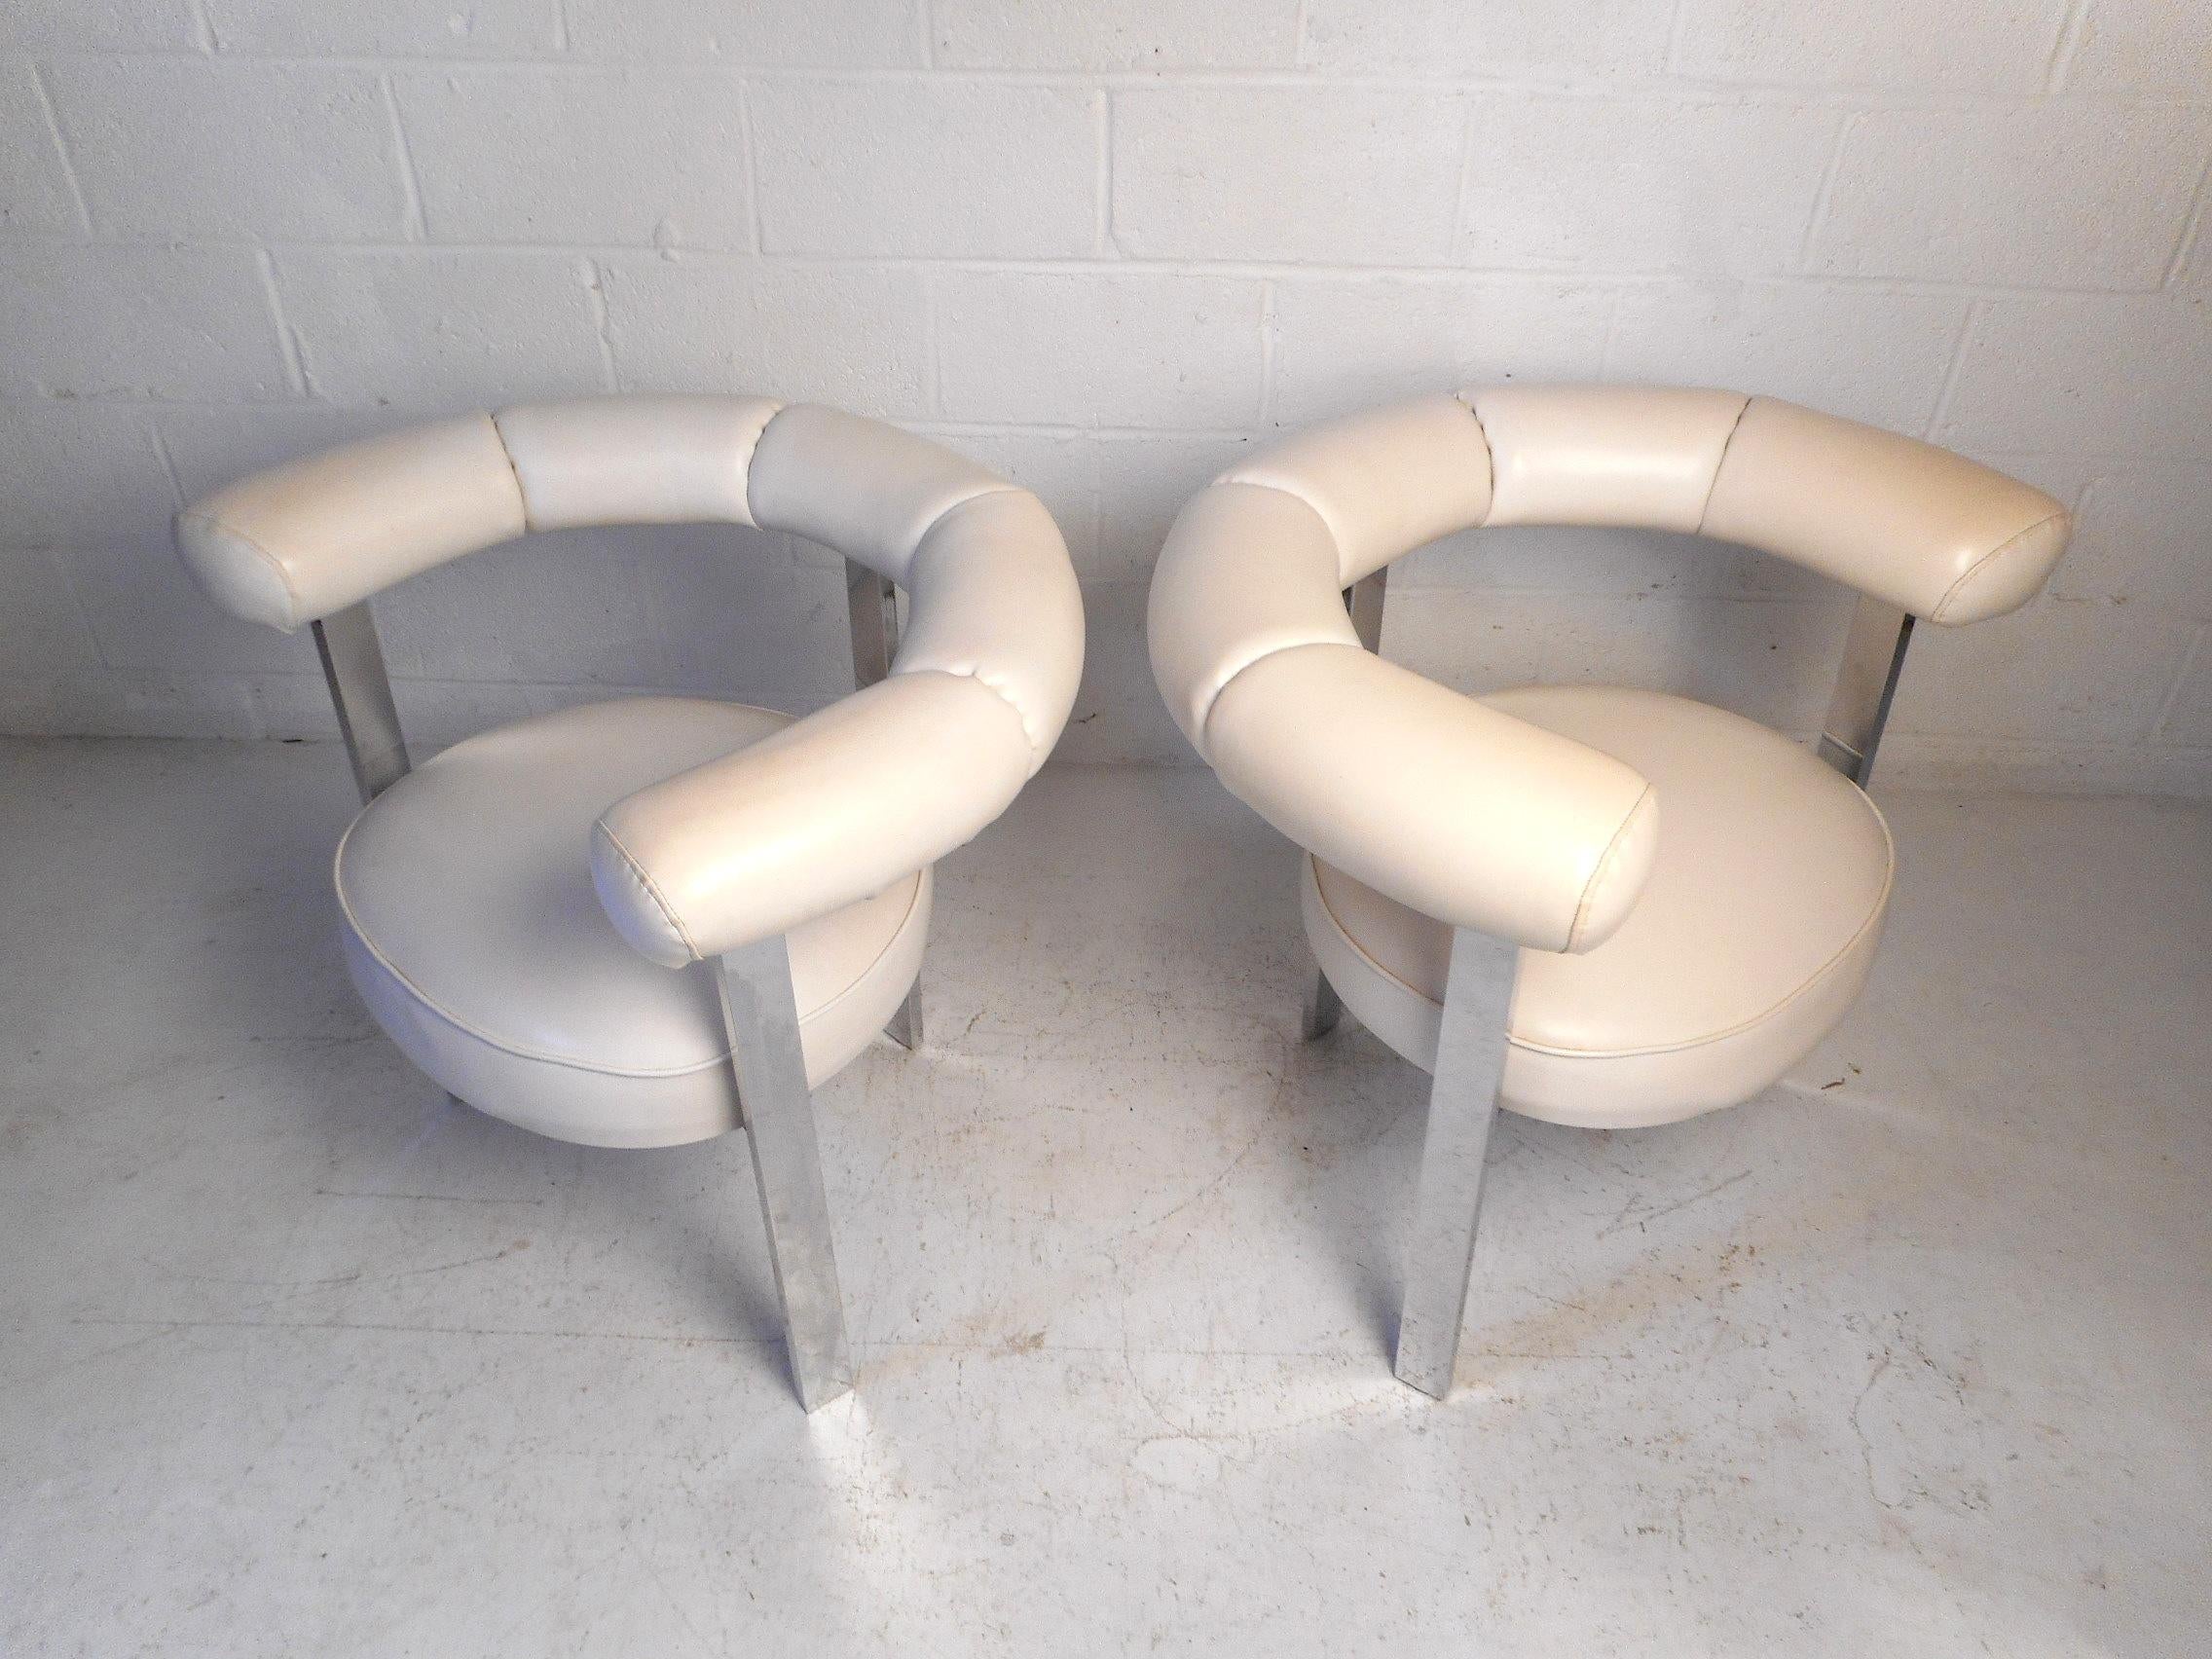 Pair of Midcentury Faux-Leather and Chrome Barrel-Back Chairs In Good Condition For Sale In Brooklyn, NY